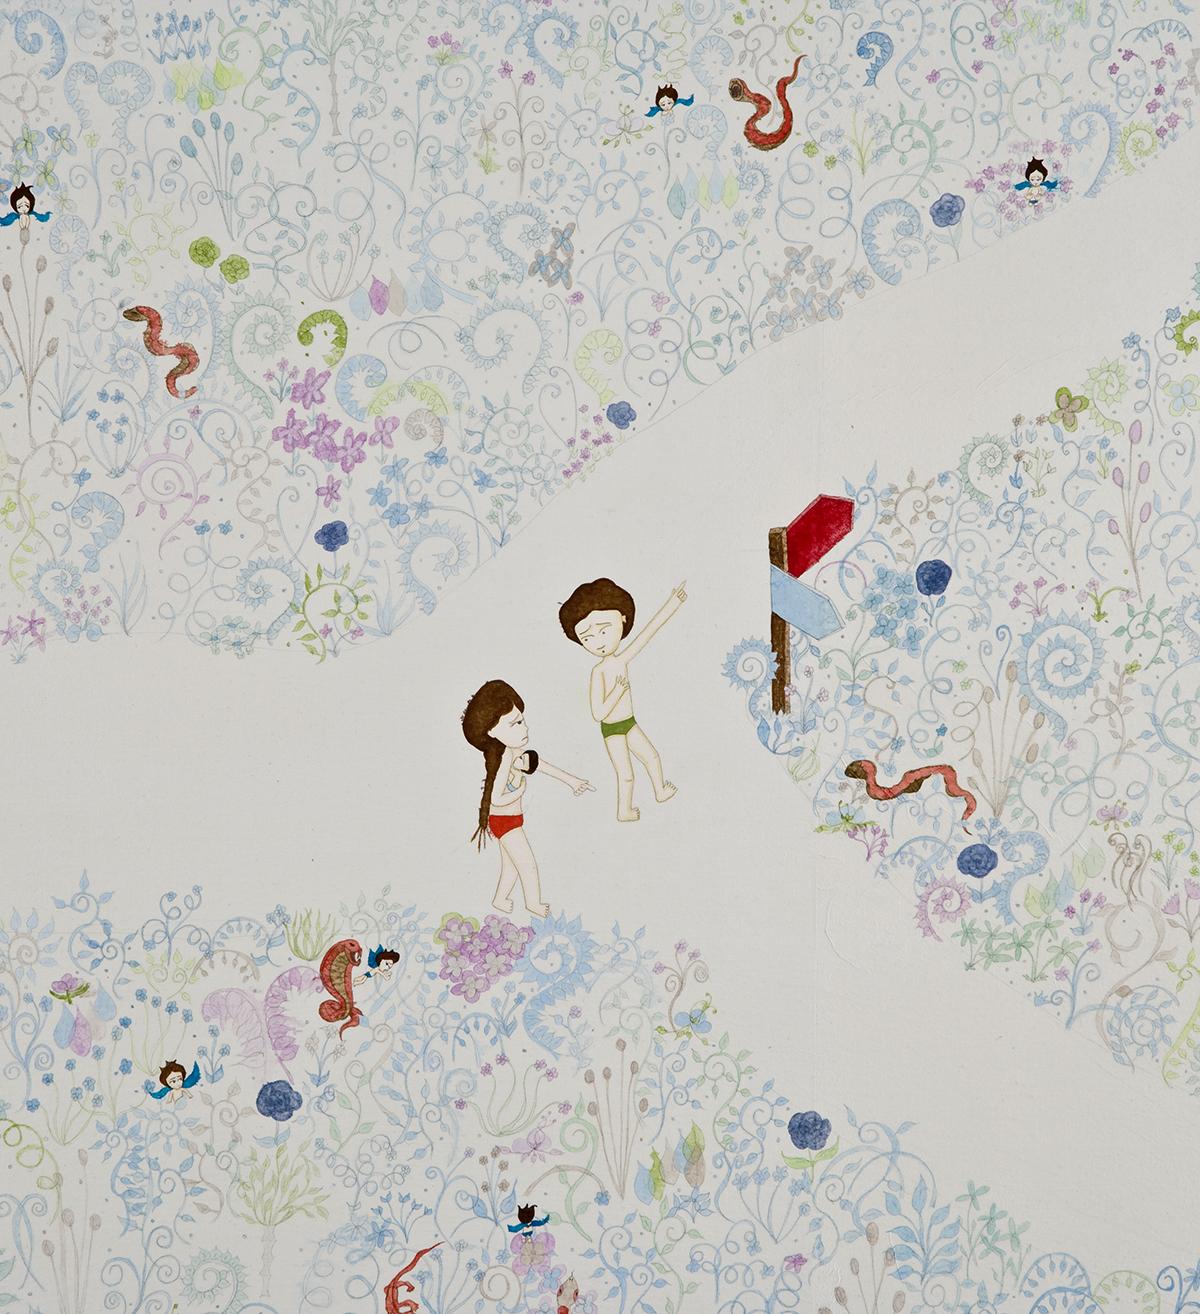 Detail of artwork by Kyung Jeon titled Chapter 5-The intersection of today and tomorrow, 2008, Gouache, graphite, watercolor on rice paper on canvas, 43.75 x 34.75 inches, 111.1 x 88.3 cm